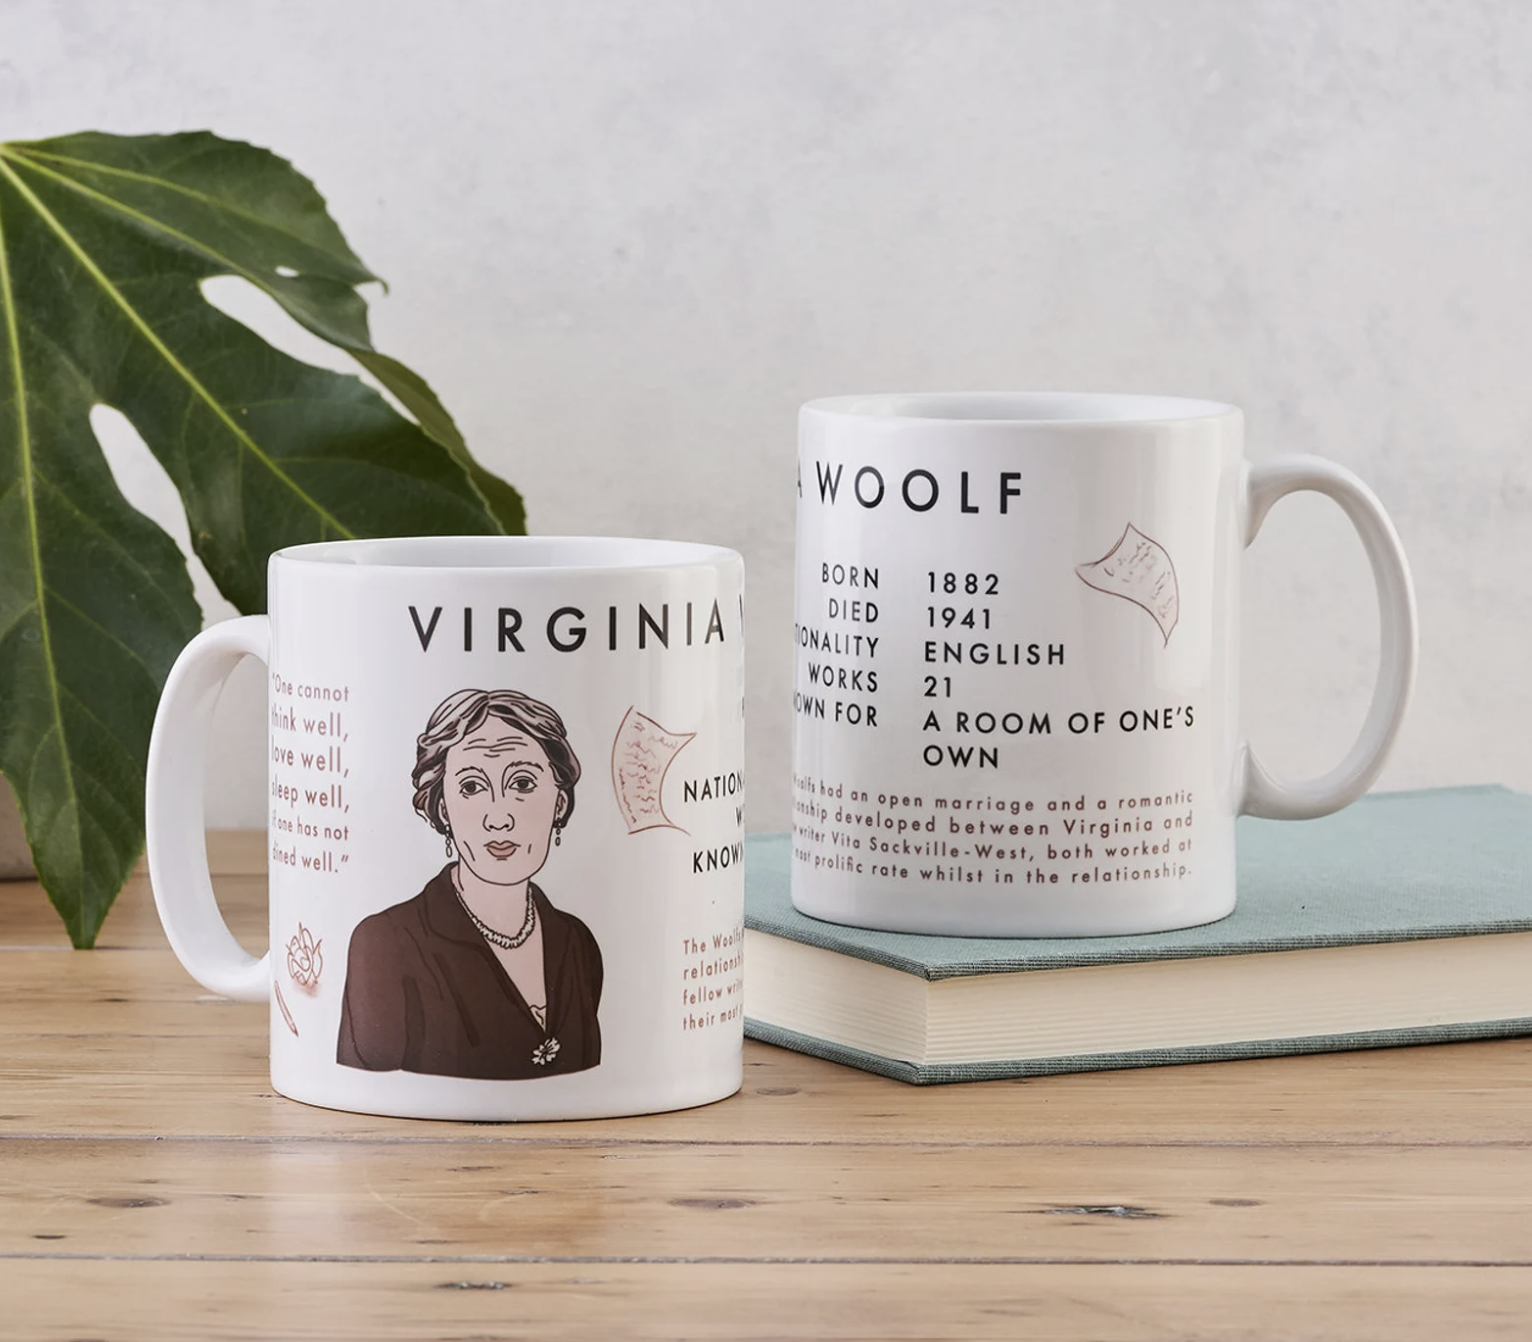 Virginia Woolf Mug with Illustrated Bust and Biographical Info